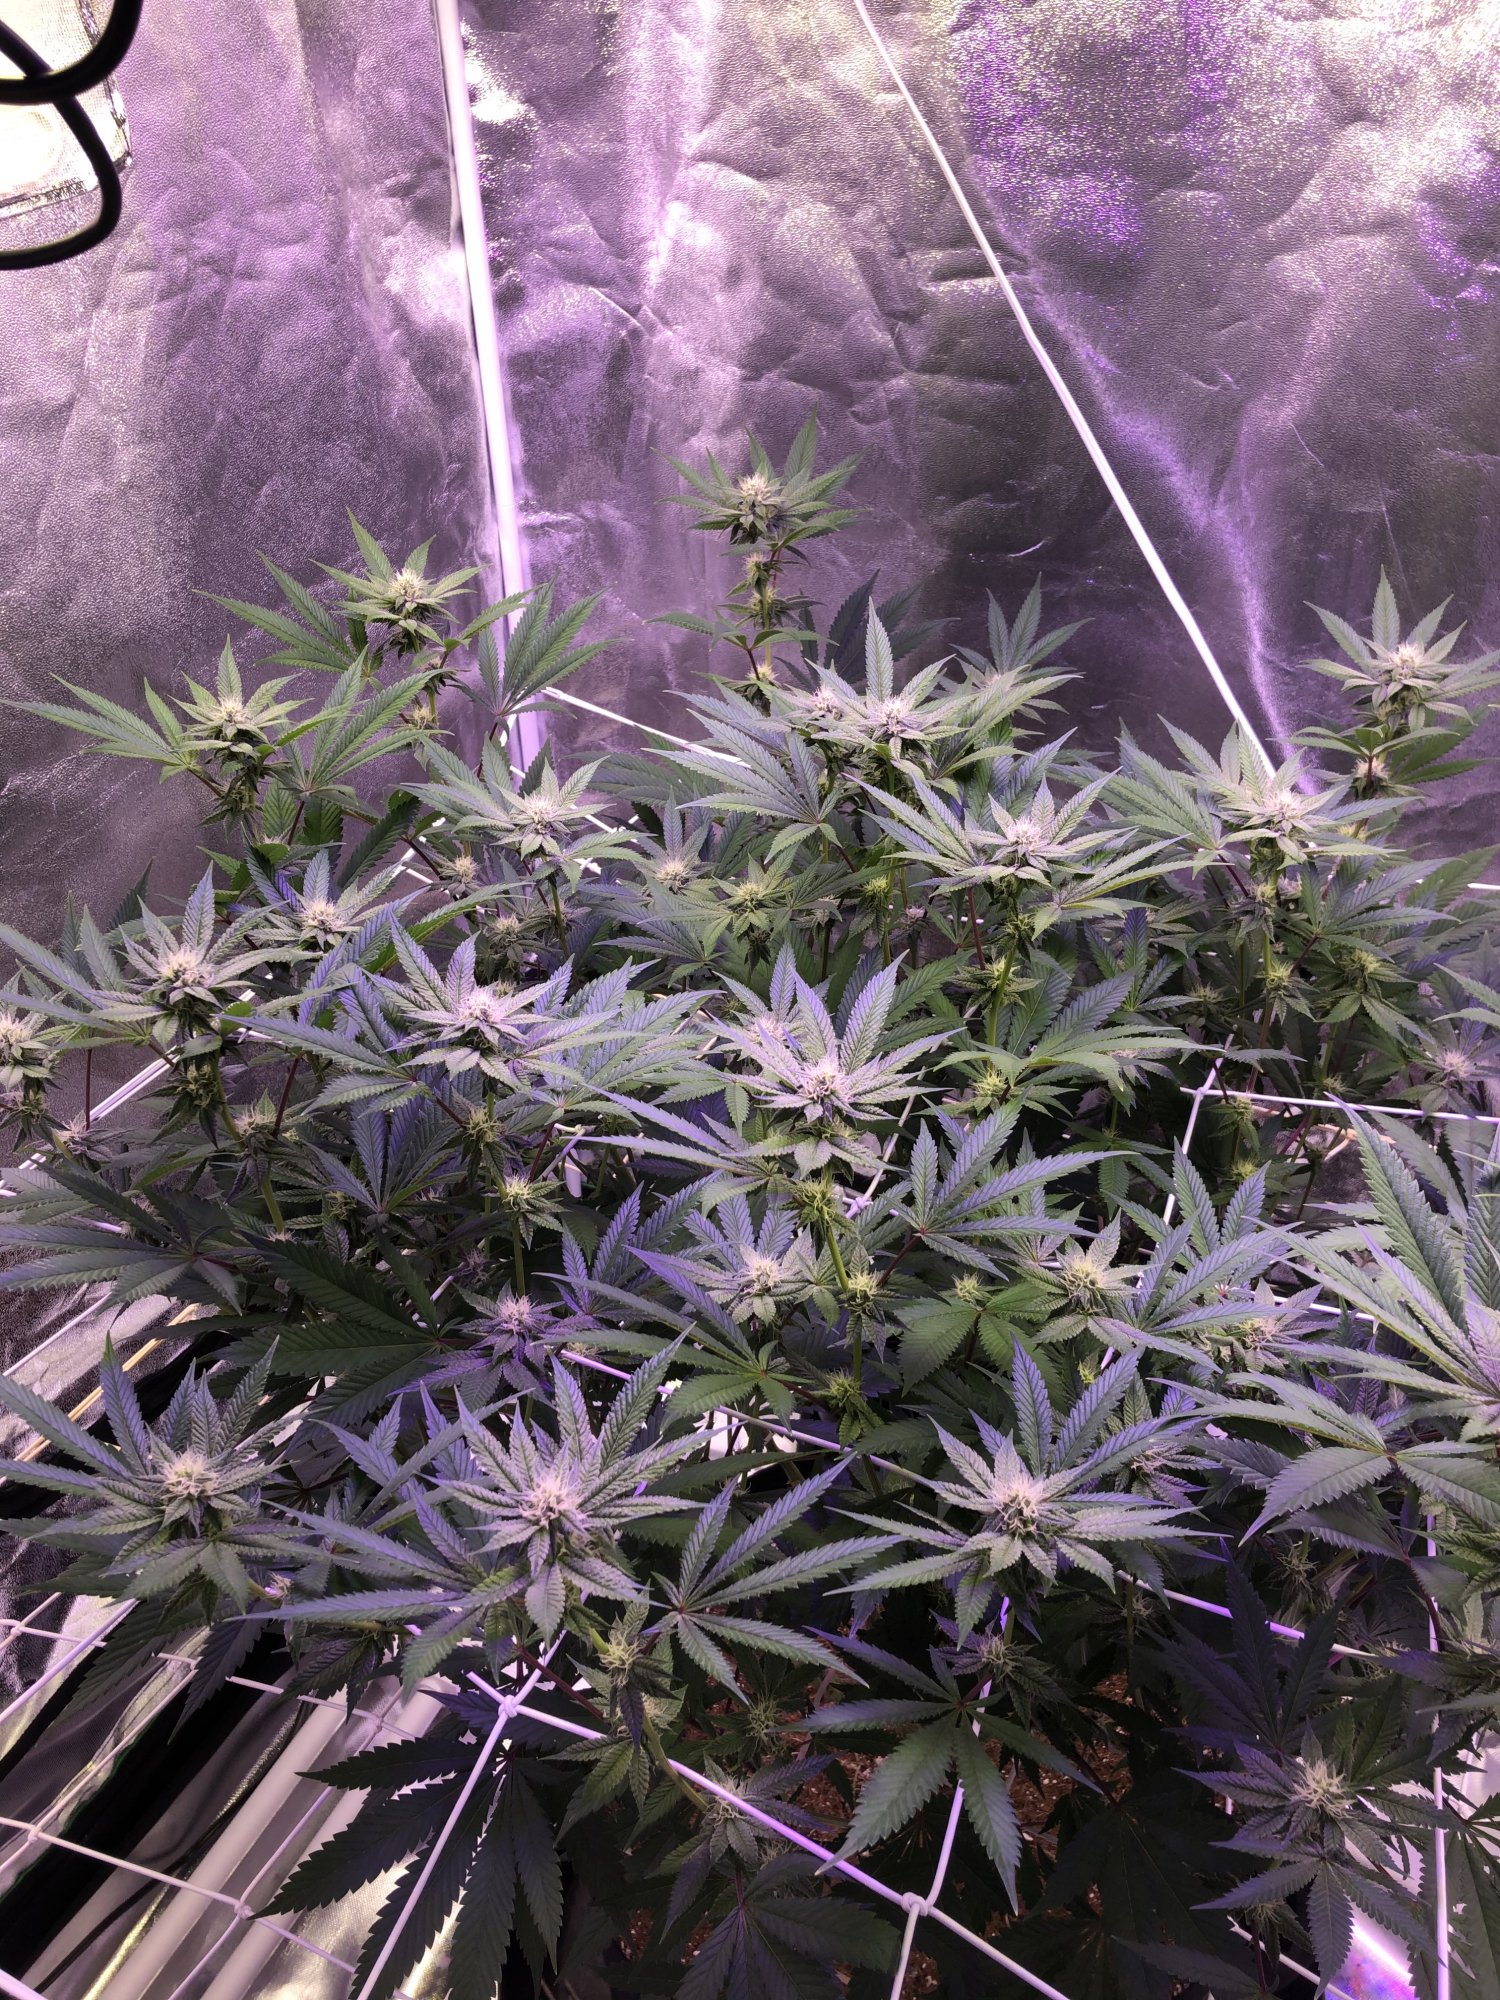 First indoor grow in coco hows it looking 4